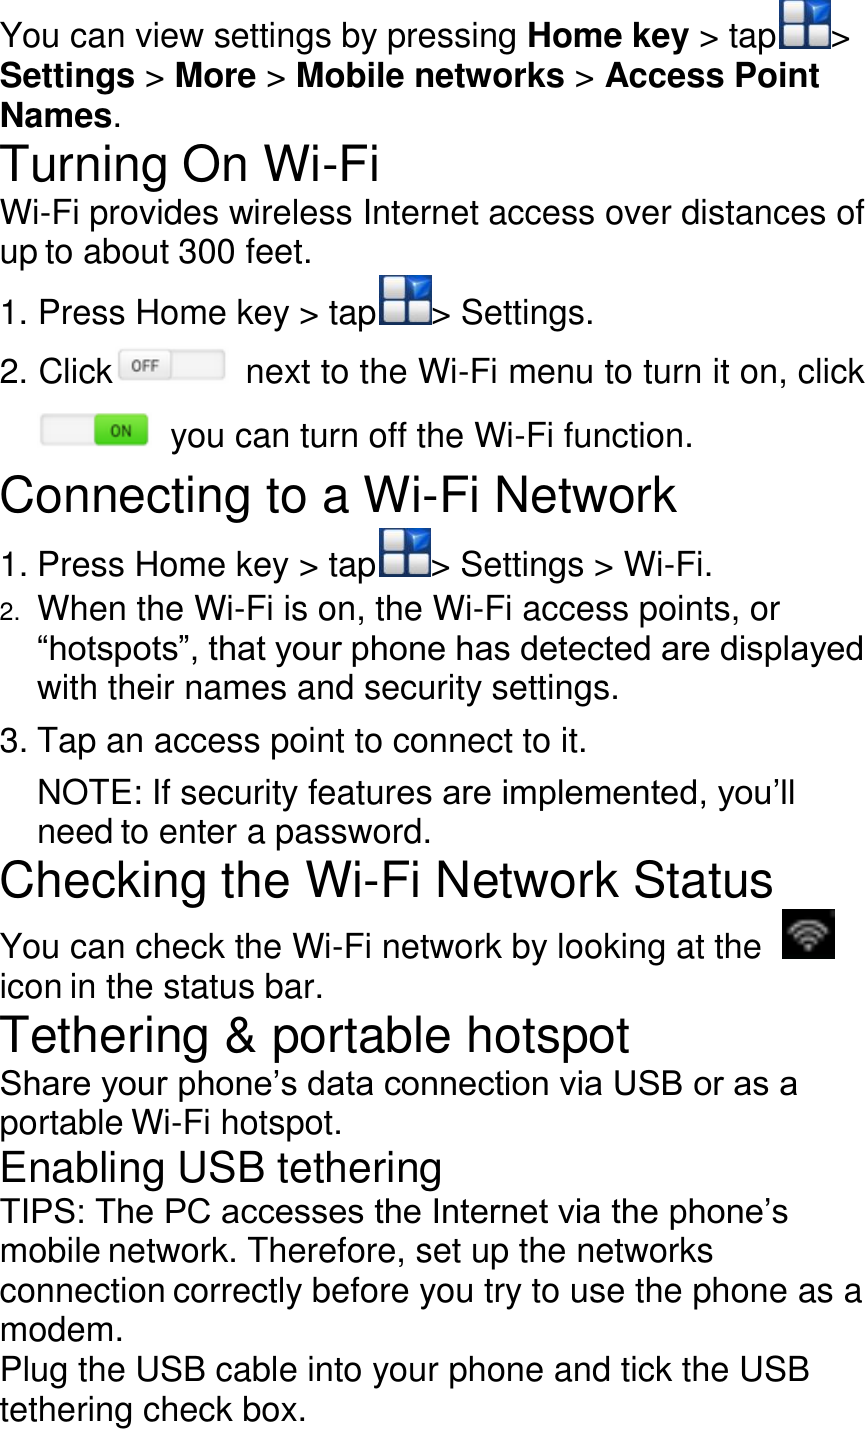 You can view settings by pressing Home key &gt; tap &gt; Settings &gt; More &gt; Mobile networks &gt; Access Point Names. Turning On Wi-Fi Wi-Fi provides wireless Internet access over distances of up to about 300 feet. 1. Press Home key &gt; tap &gt; Settings. 2. Click   next to the Wi-Fi menu to turn it on, click  you can turn off the Wi-Fi function. Connecting to a Wi-Fi Network 1. Press Home key &gt; tap &gt; Settings &gt; Wi-Fi. 2. When the Wi-Fi is on, the Wi-Fi access points, or ―hotspots‖, that your phone has detected are displayed with their names and security settings. 3. Tap an access point to connect to it. NOTE: If security features are implemented, you’ll need to enter a password. Checking the Wi-Fi Network Status You can check the Wi-Fi network by looking at the   icon in the status bar. Tethering &amp; portable hotspot Share your phone’s data connection via USB or as a portable Wi-Fi hotspot. Enabling USB tethering TIPS: The PC accesses the Internet via the phone’s mobile network. Therefore, set up the networks connection correctly before you try to use the phone as a modem. Plug the USB cable into your phone and tick the USB tethering check box. 